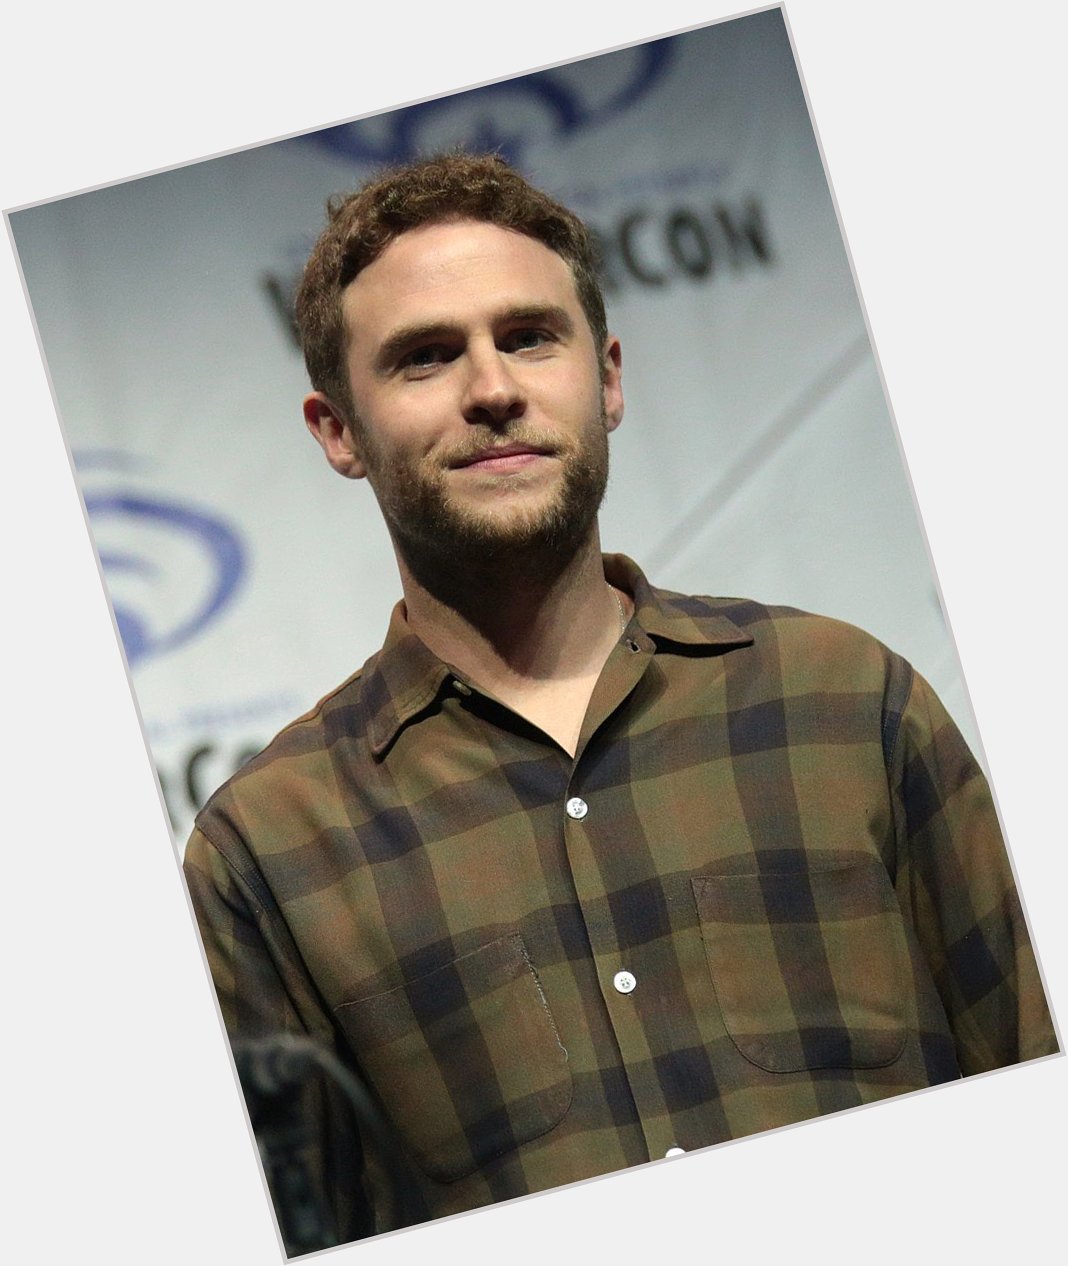 Happy birthday, Iain De Caestecker. Thank you for bringing my favorite character to life with your brilliant talent 